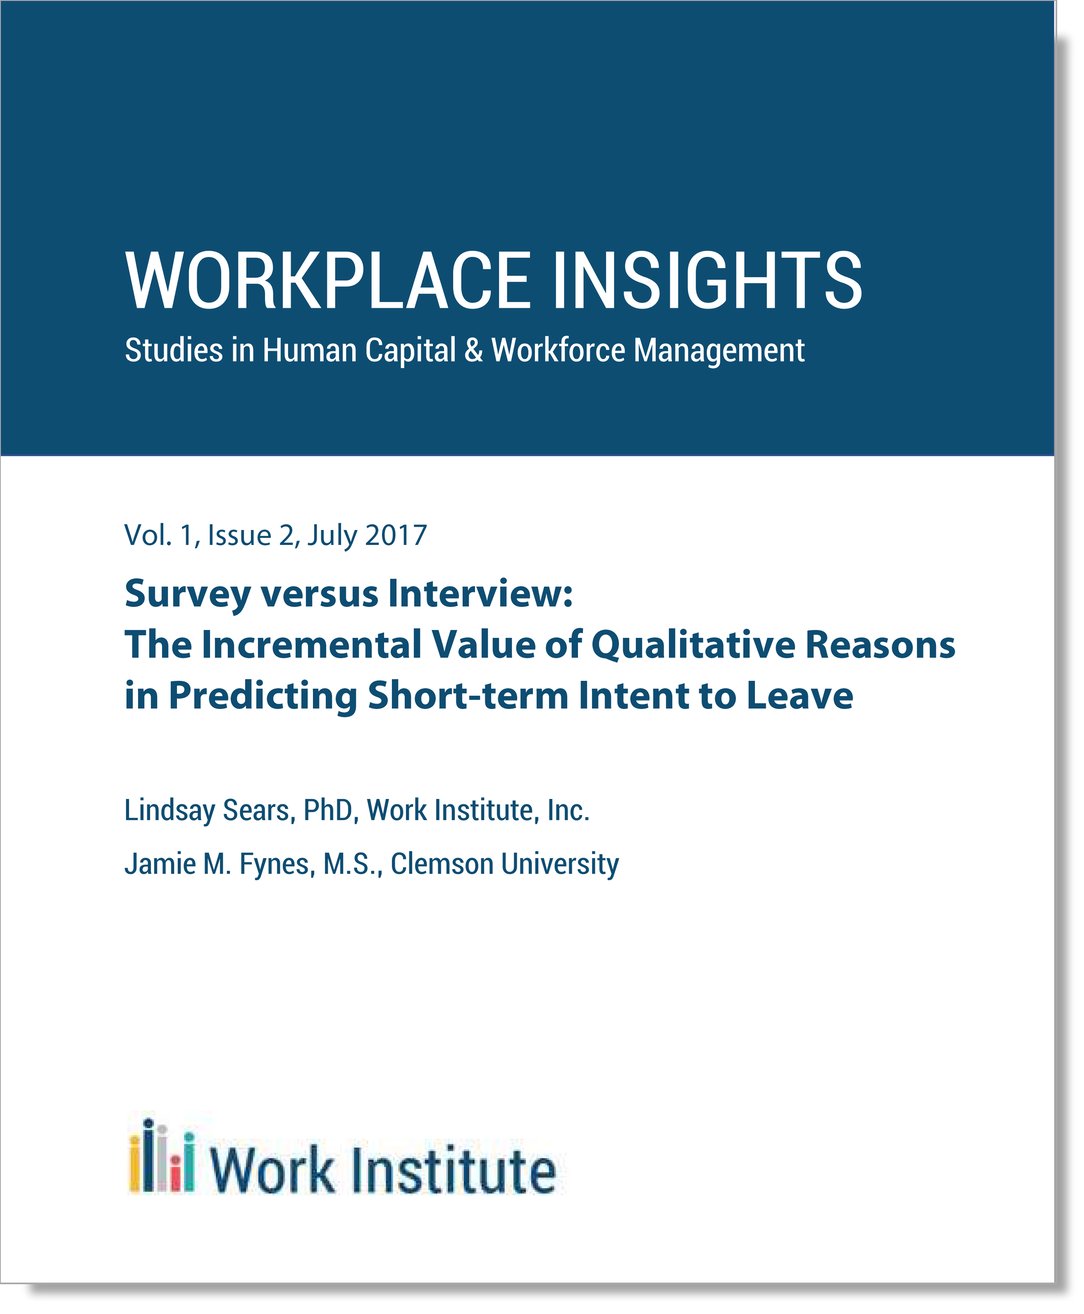 Workplace Insights-Vol01-Issue02-Survey vs Interview (Fynes&Sears)-2017-FINAL 7.21-1.png